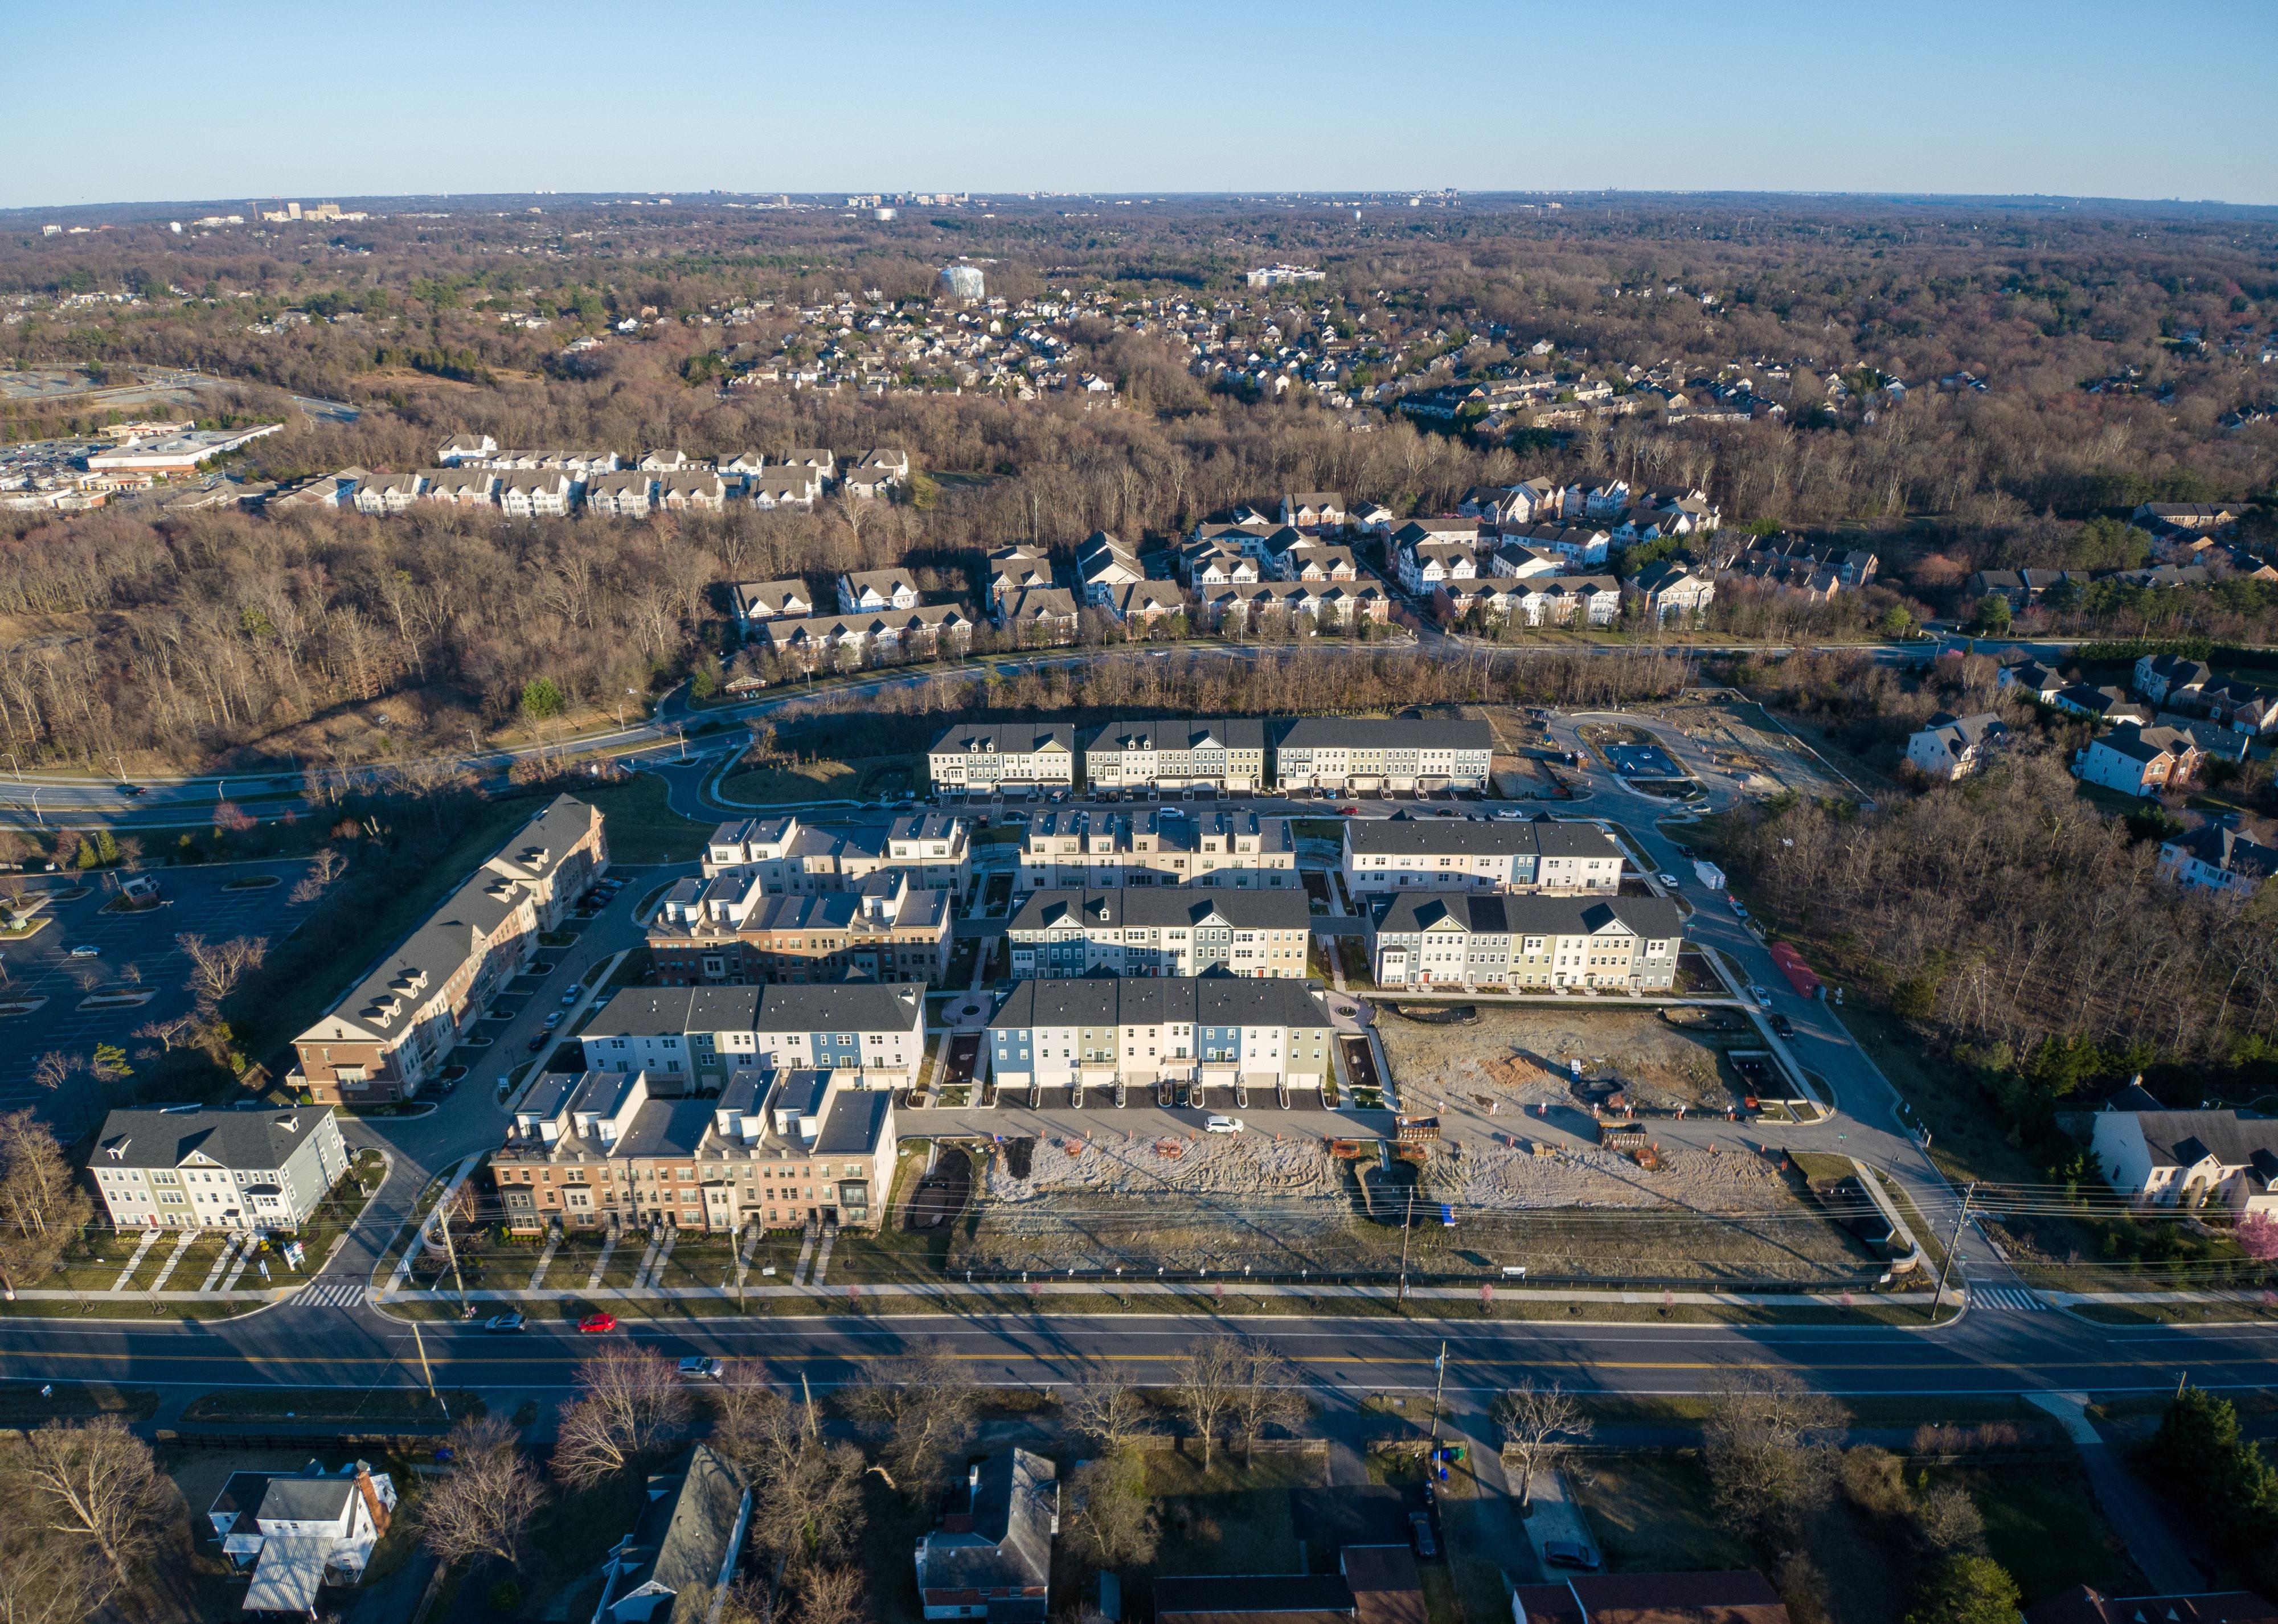 An aerial view of a residential neighborhood.